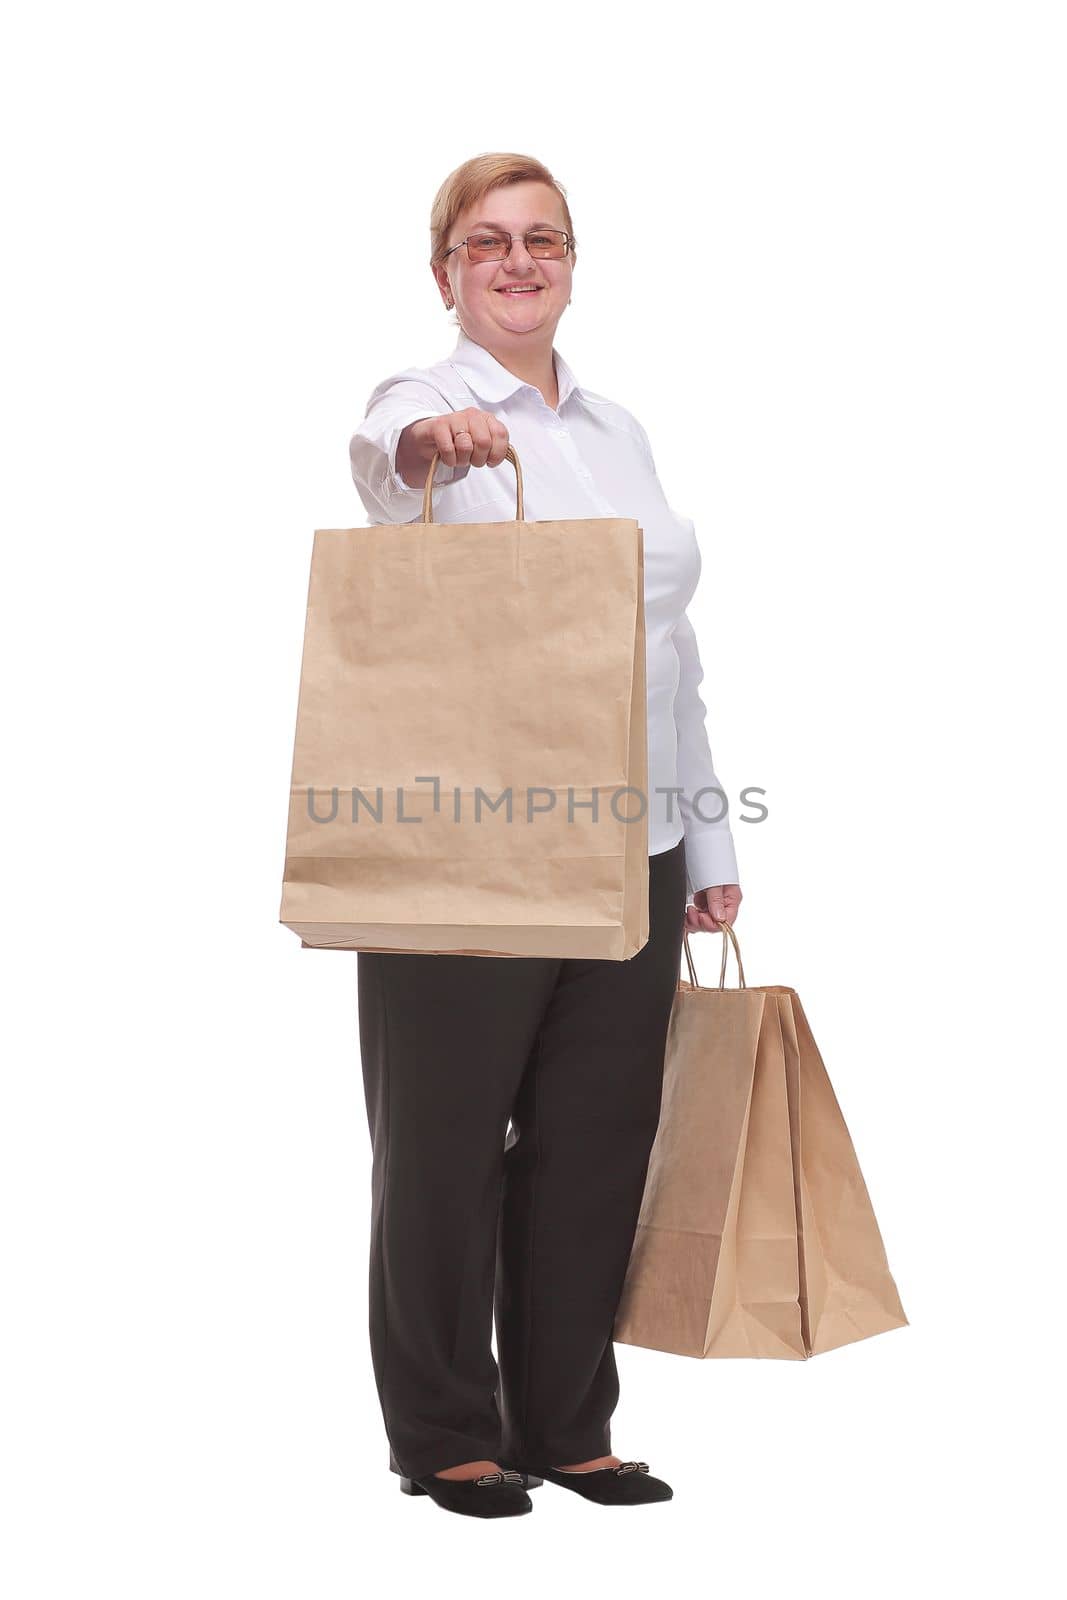 Middle aged woman cheerful and smiling, very excited carrying a shopping bags. Concept of a good shopping